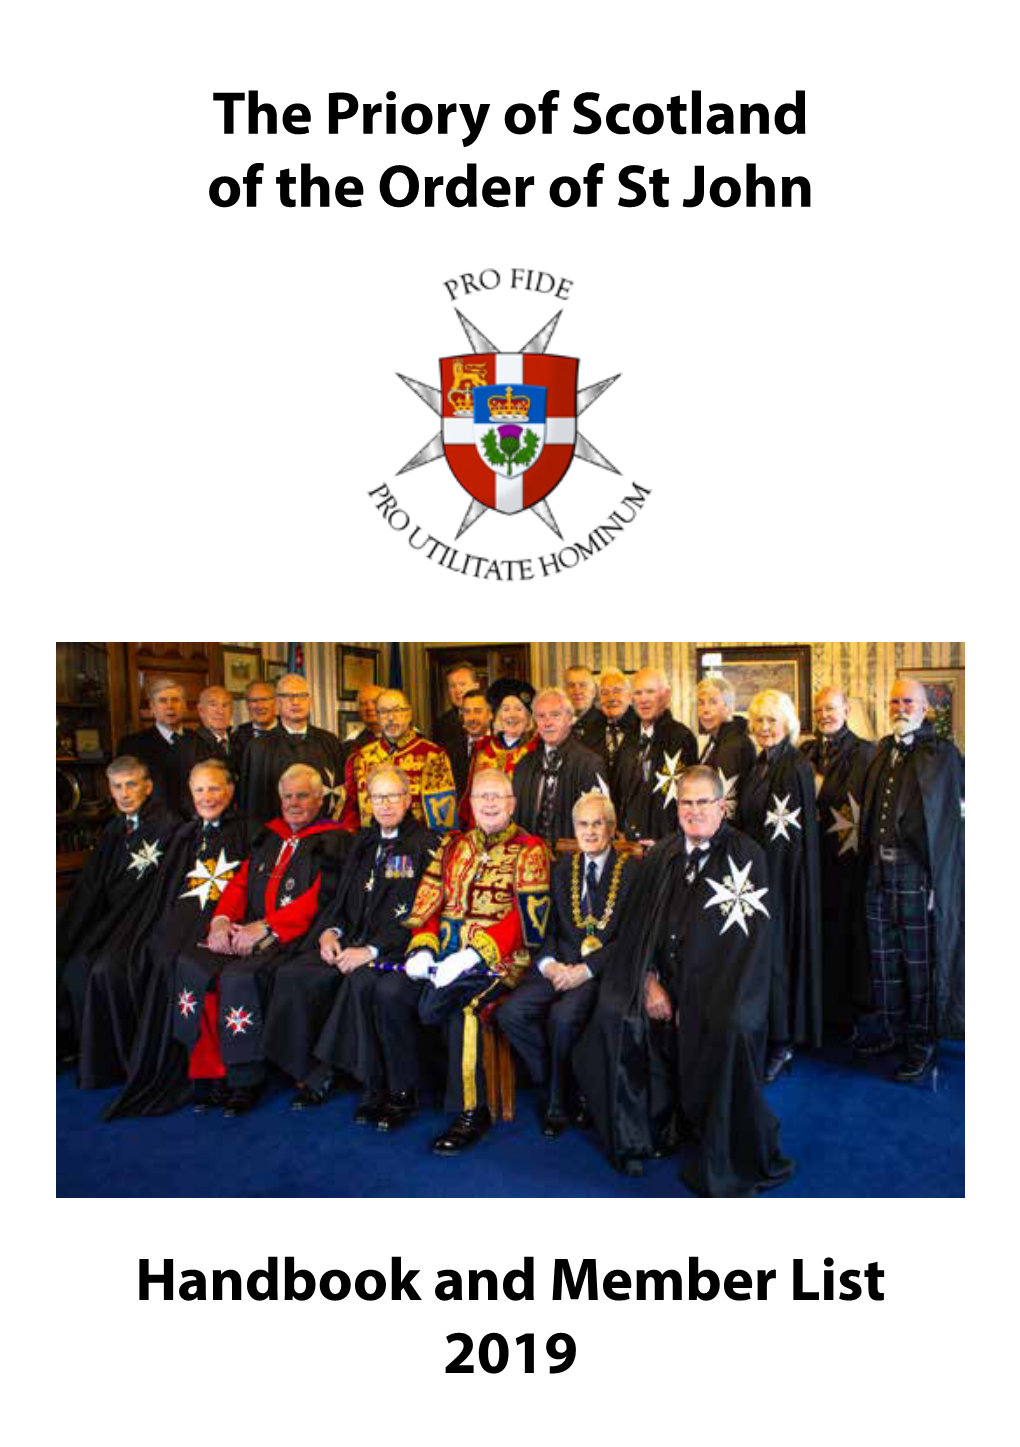 The Priory of Scotland of the Order of St John Handbook and Member List